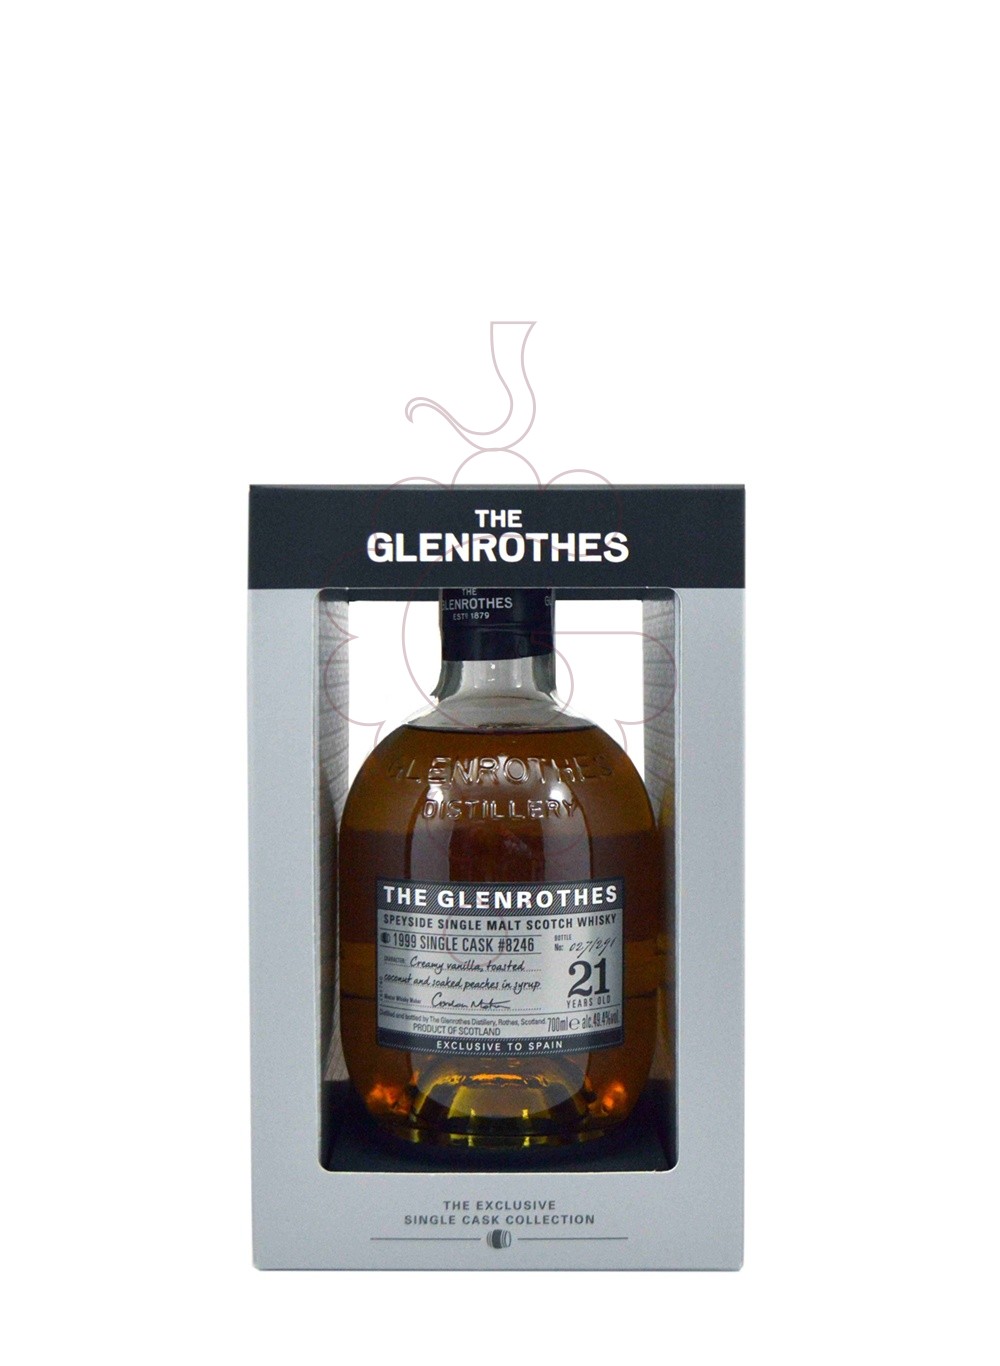 Photo Whisky Glen rothes 21 anys 70 cl